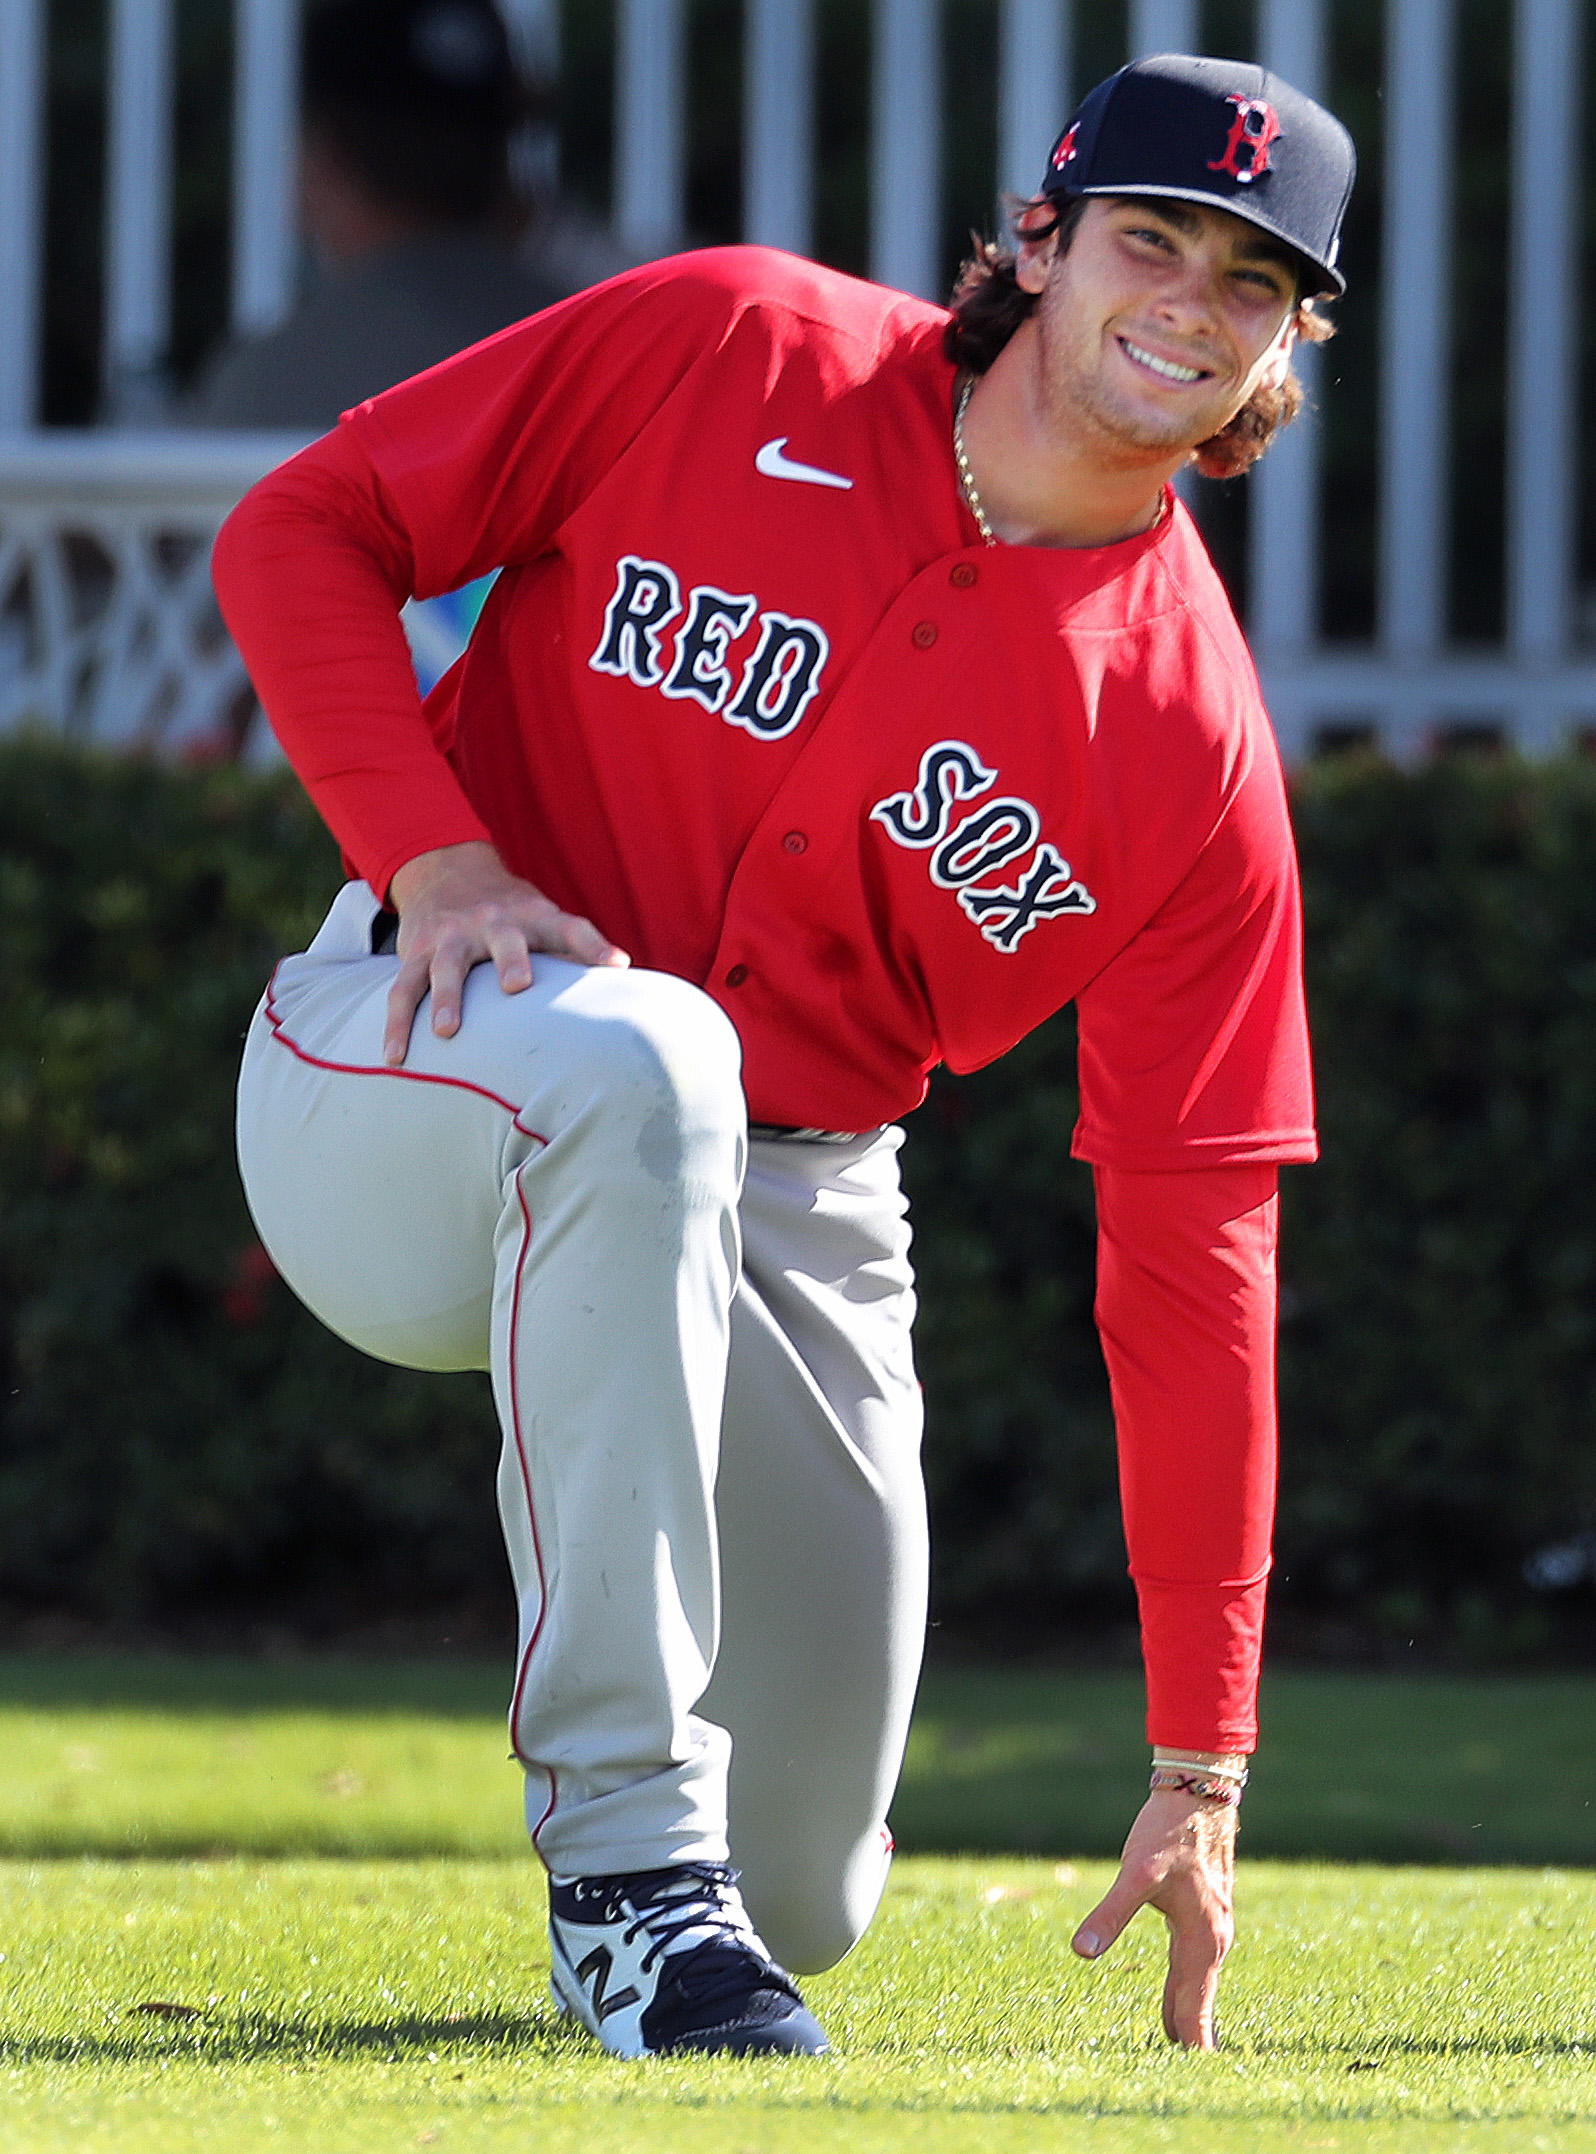 Young Red Sox star Triston Casas hoping for a prosperous 2023 season